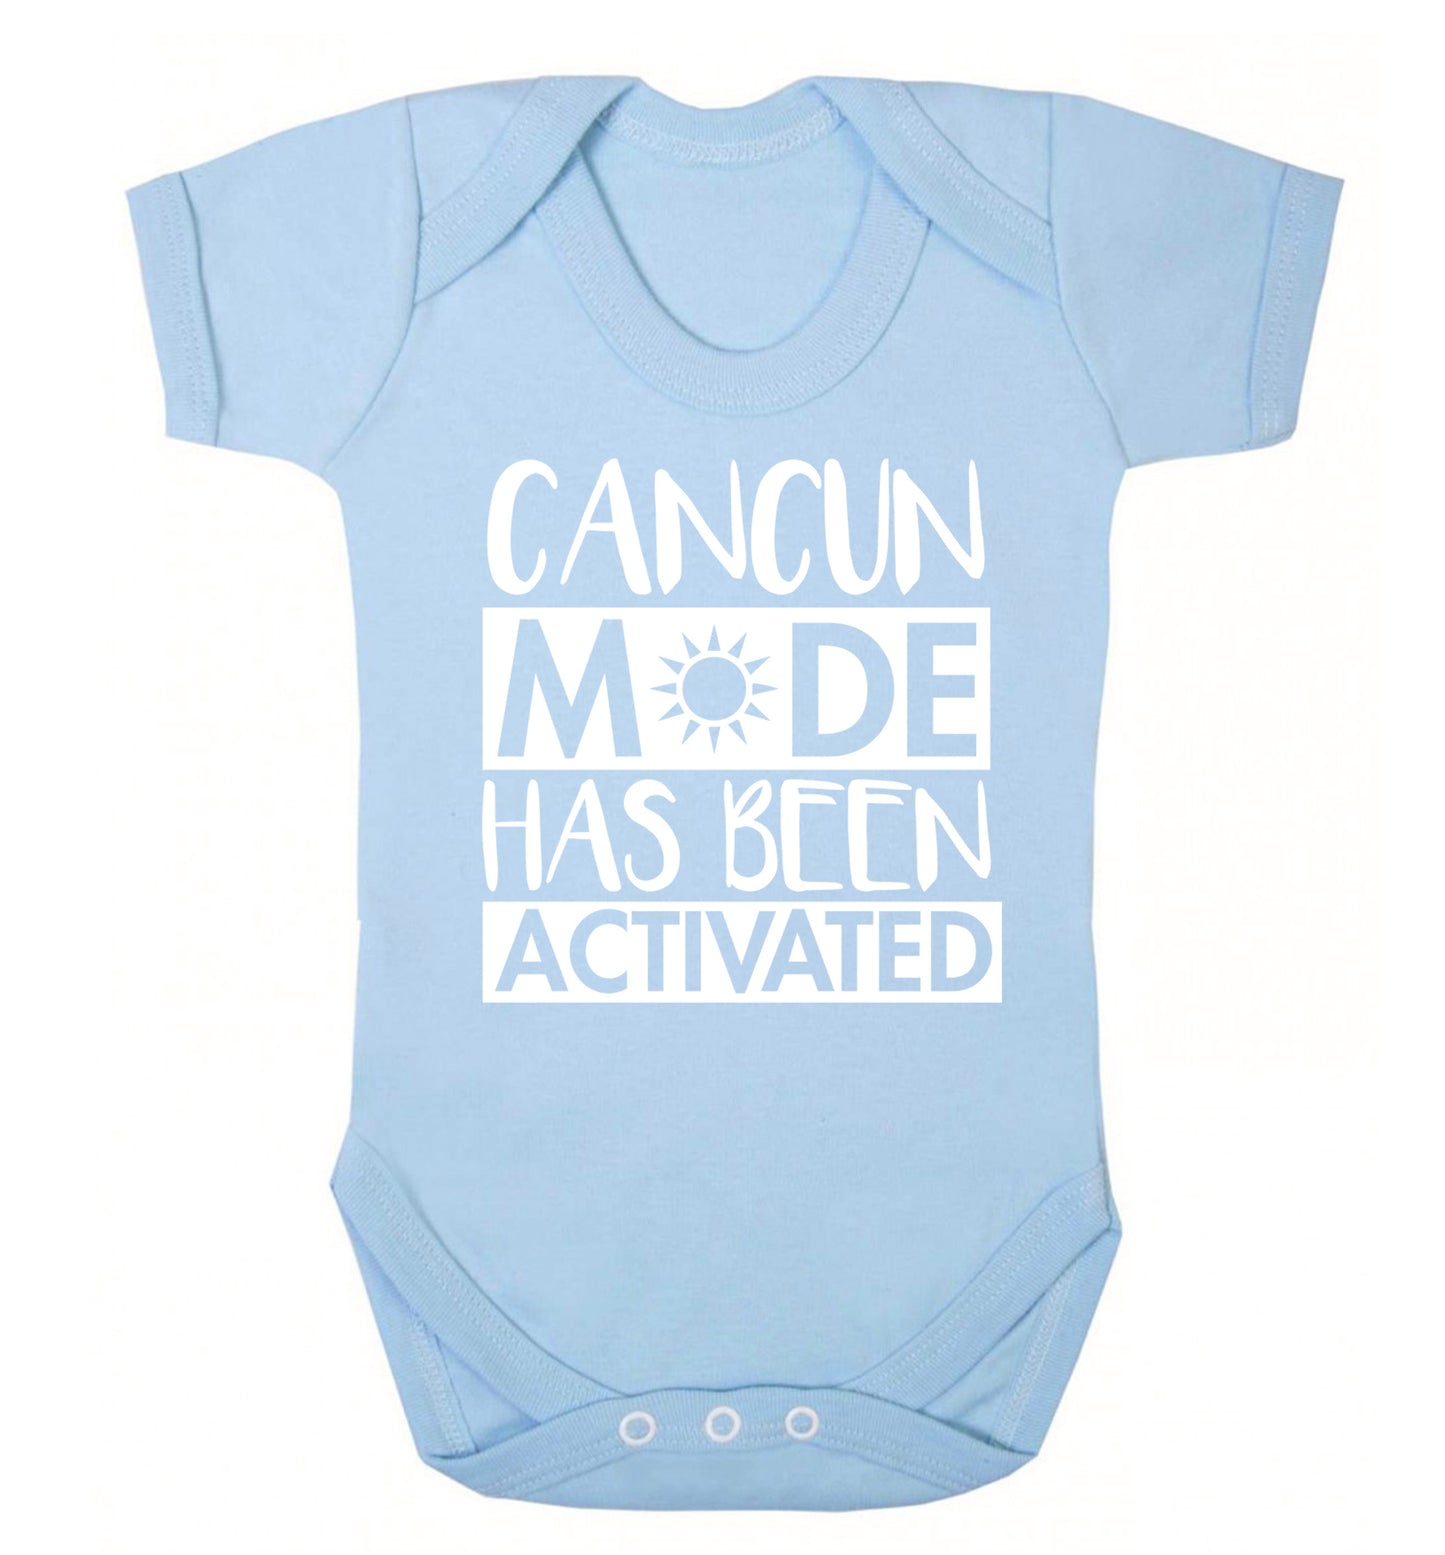 Cancun mode has been activated Baby Vest pale blue 18-24 months